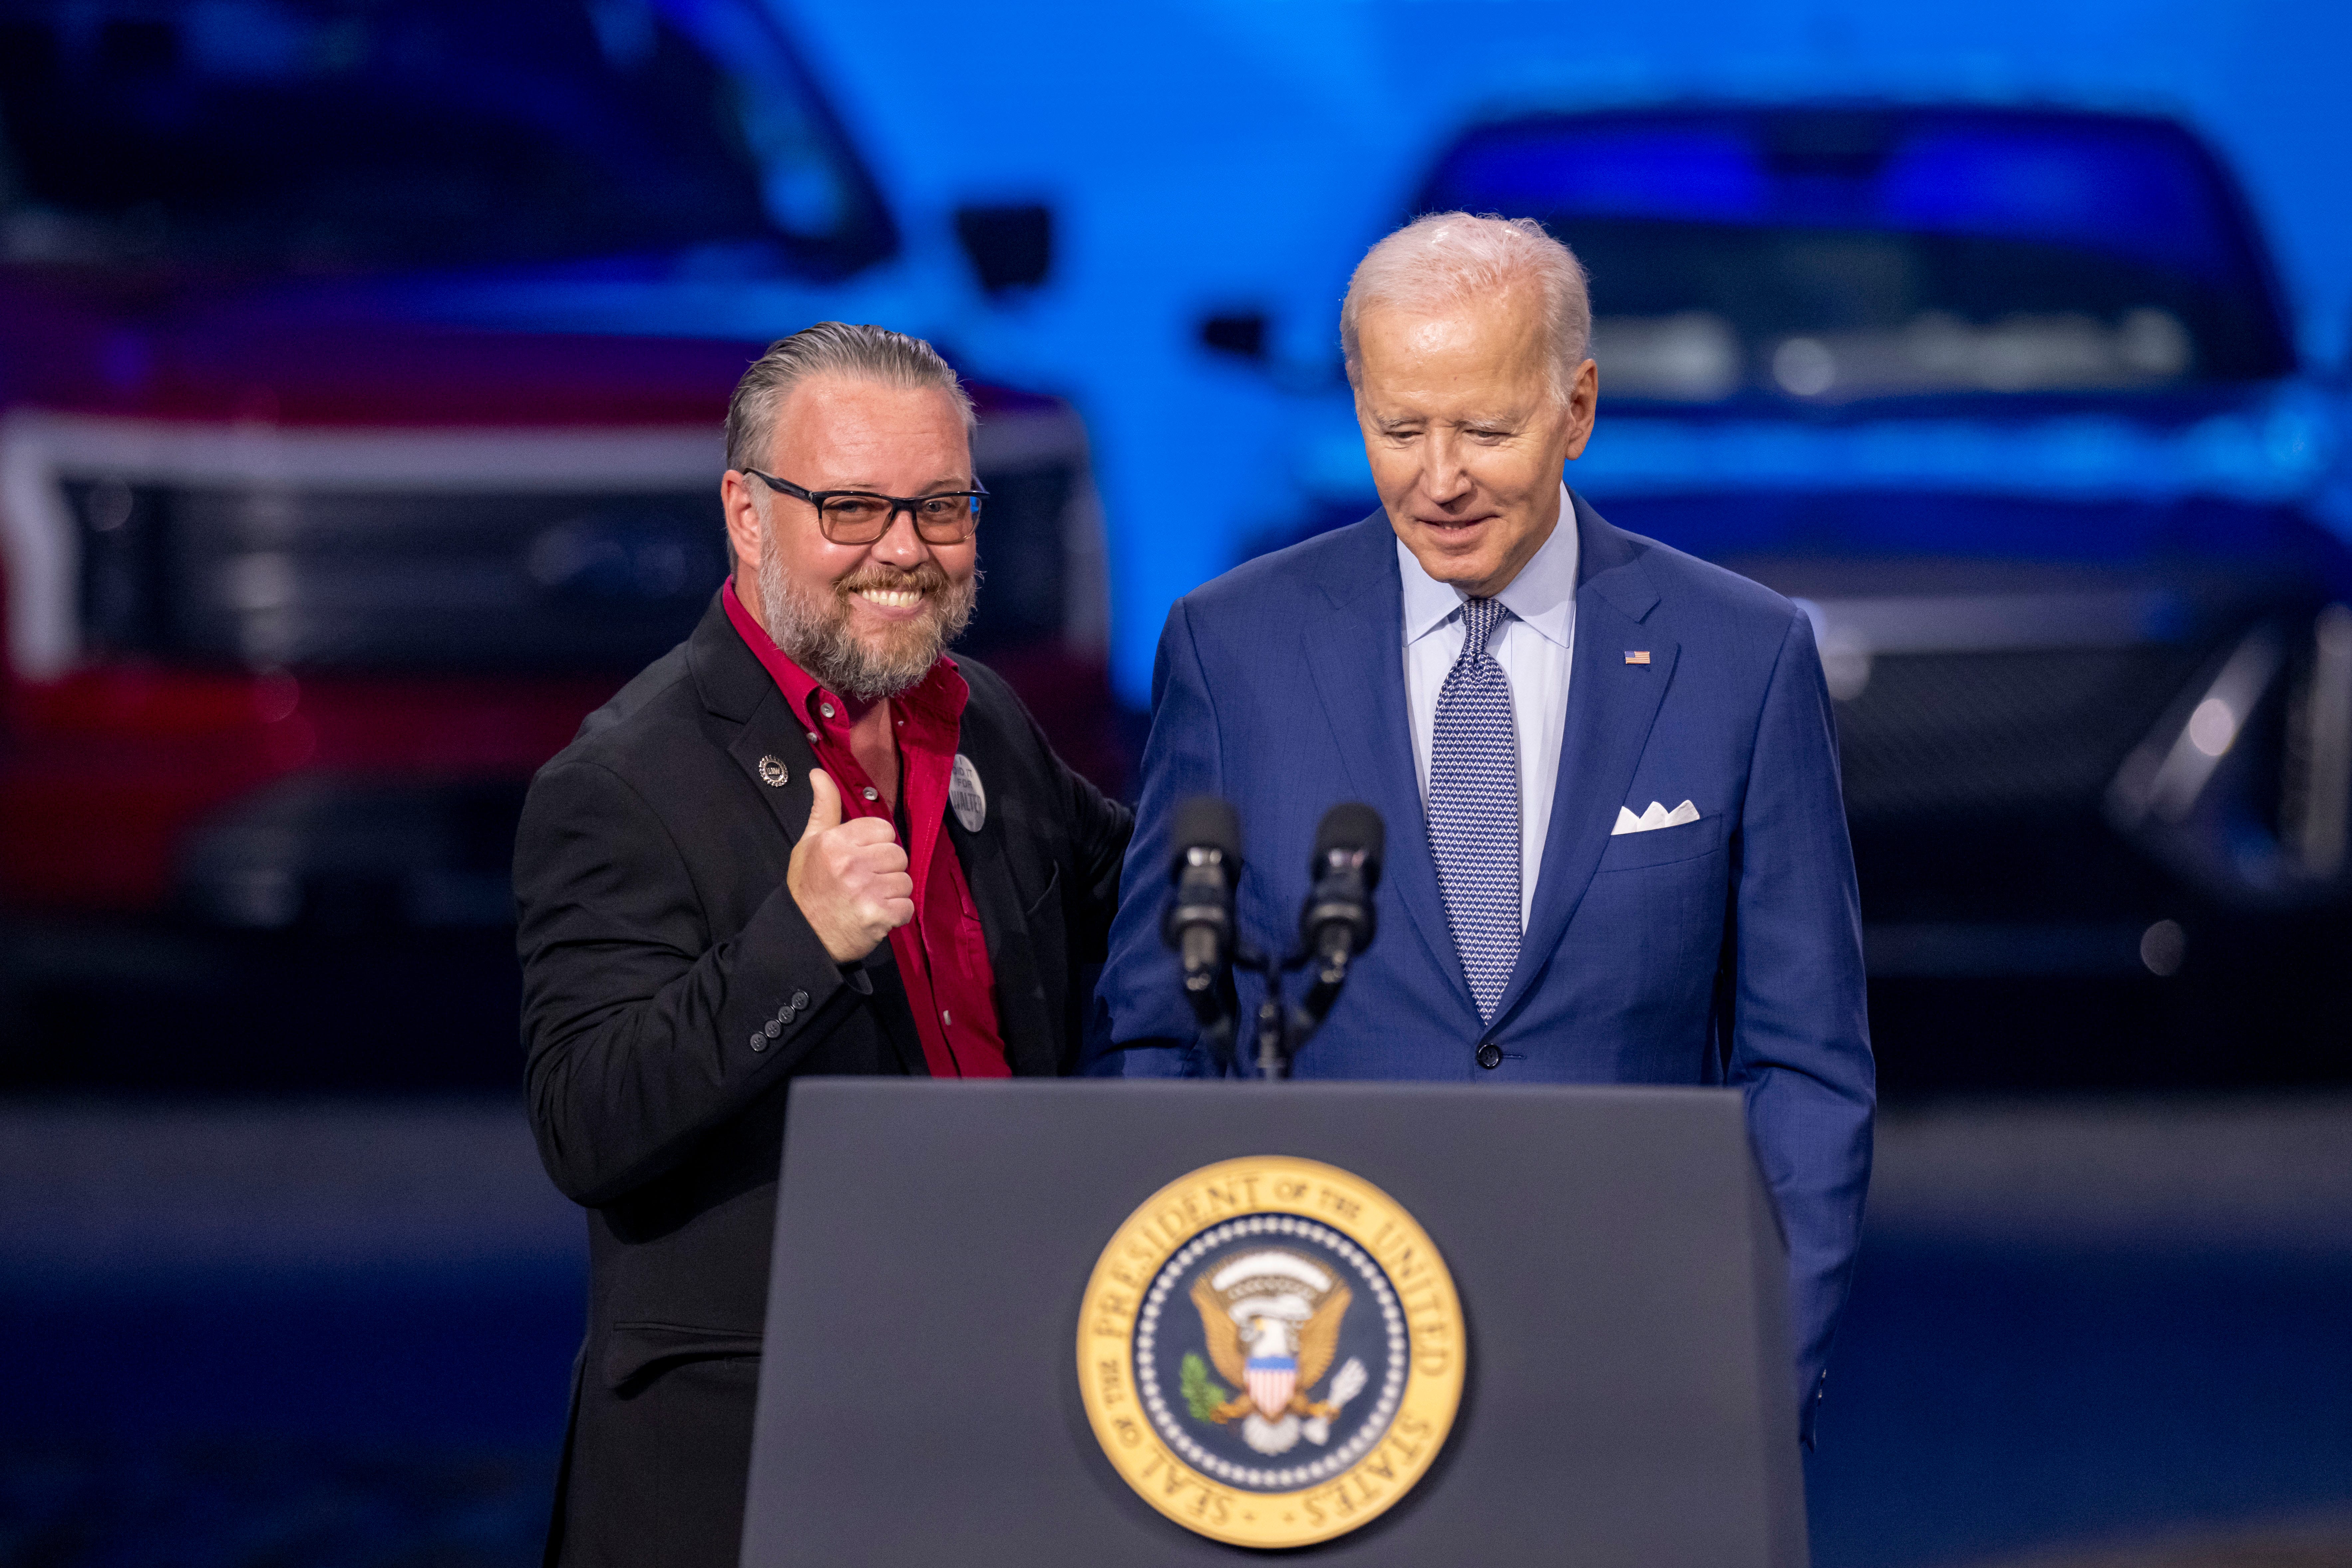 Ryan Buchalski, President of UAW Local 598, gives a thumbs up after introducing President Joe Biden at the North American International Auto Show at Huntington Place, in Detroit, September 14, 2022.